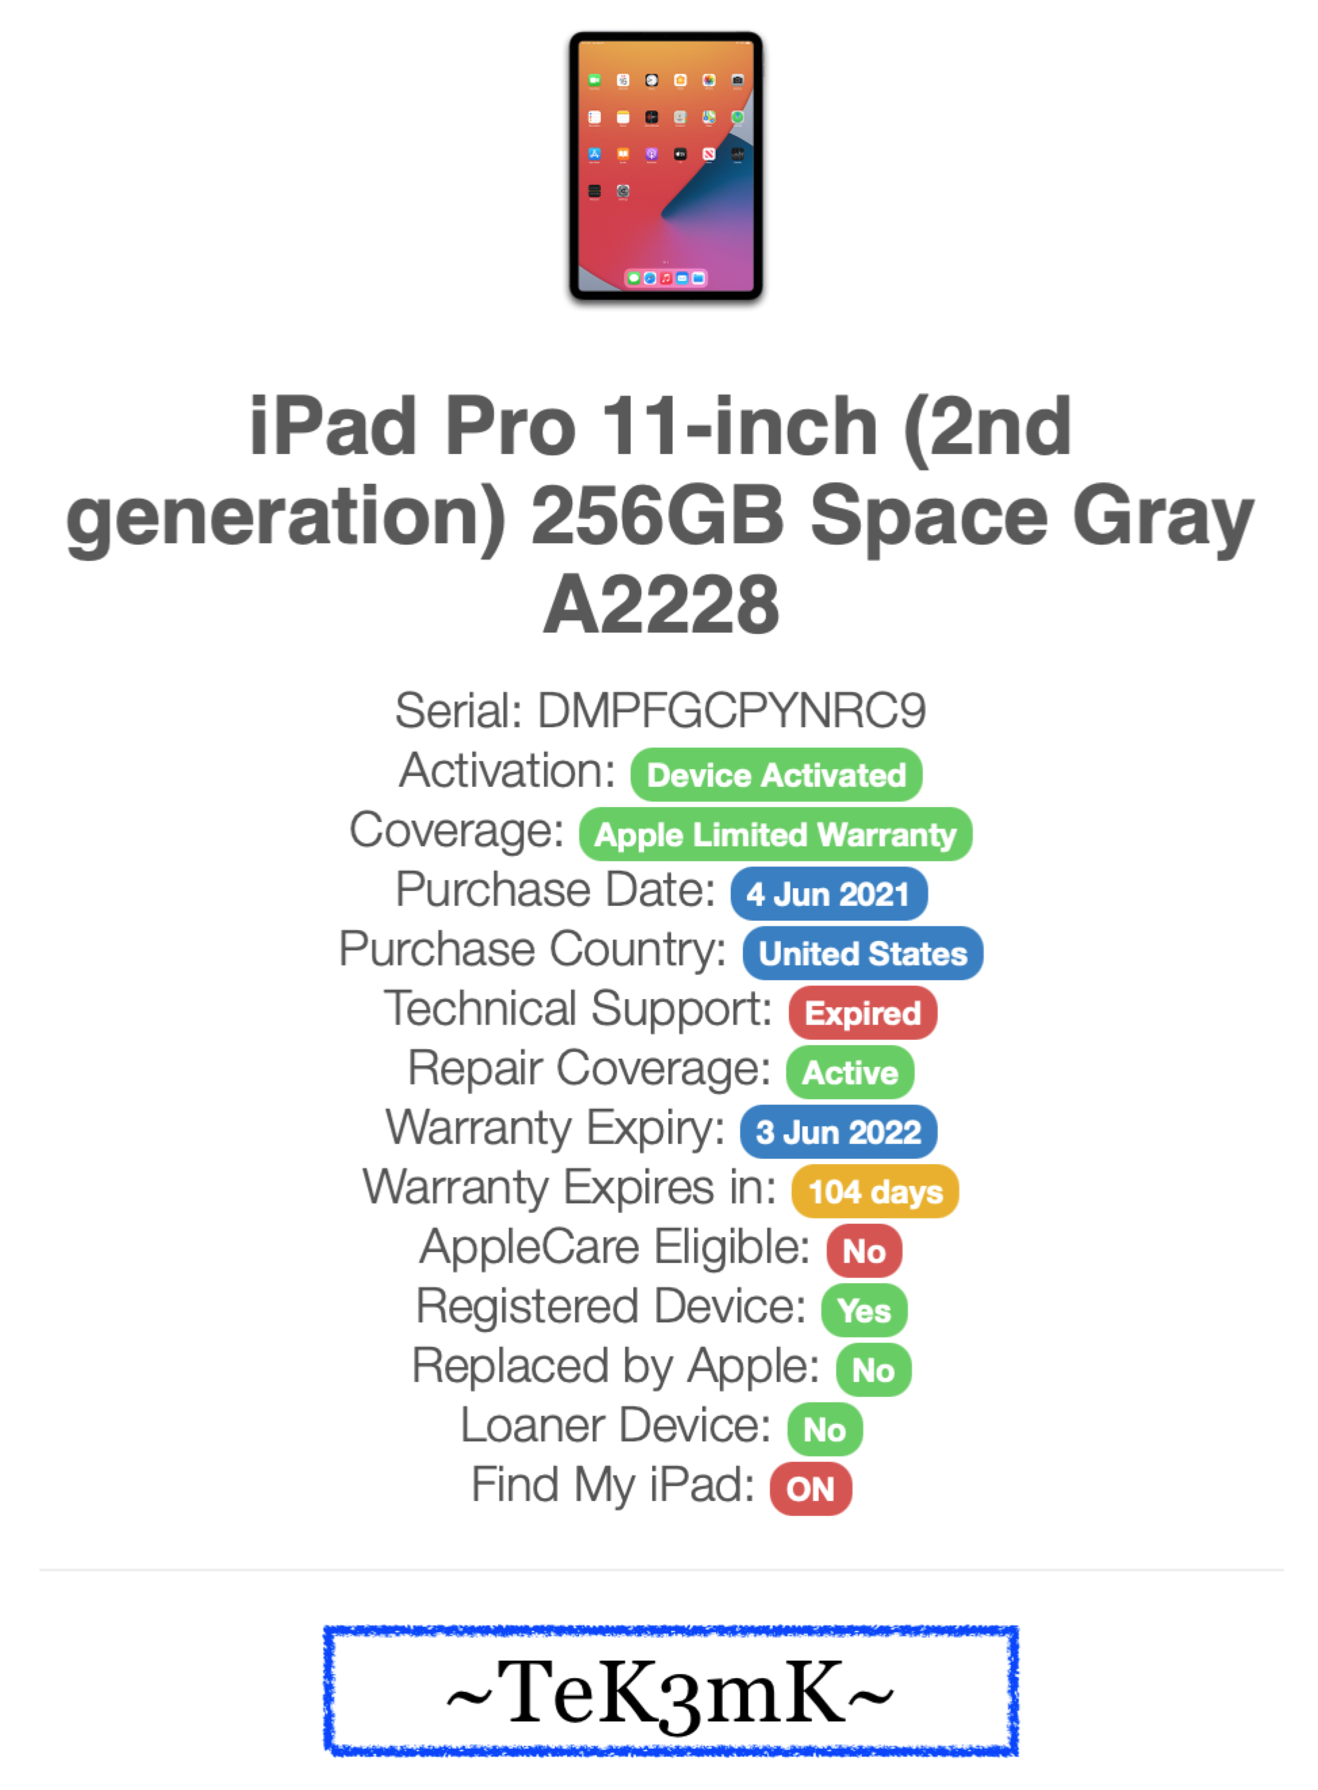 iPad Pro 11-inch (2nd generation) - Technical Specifications